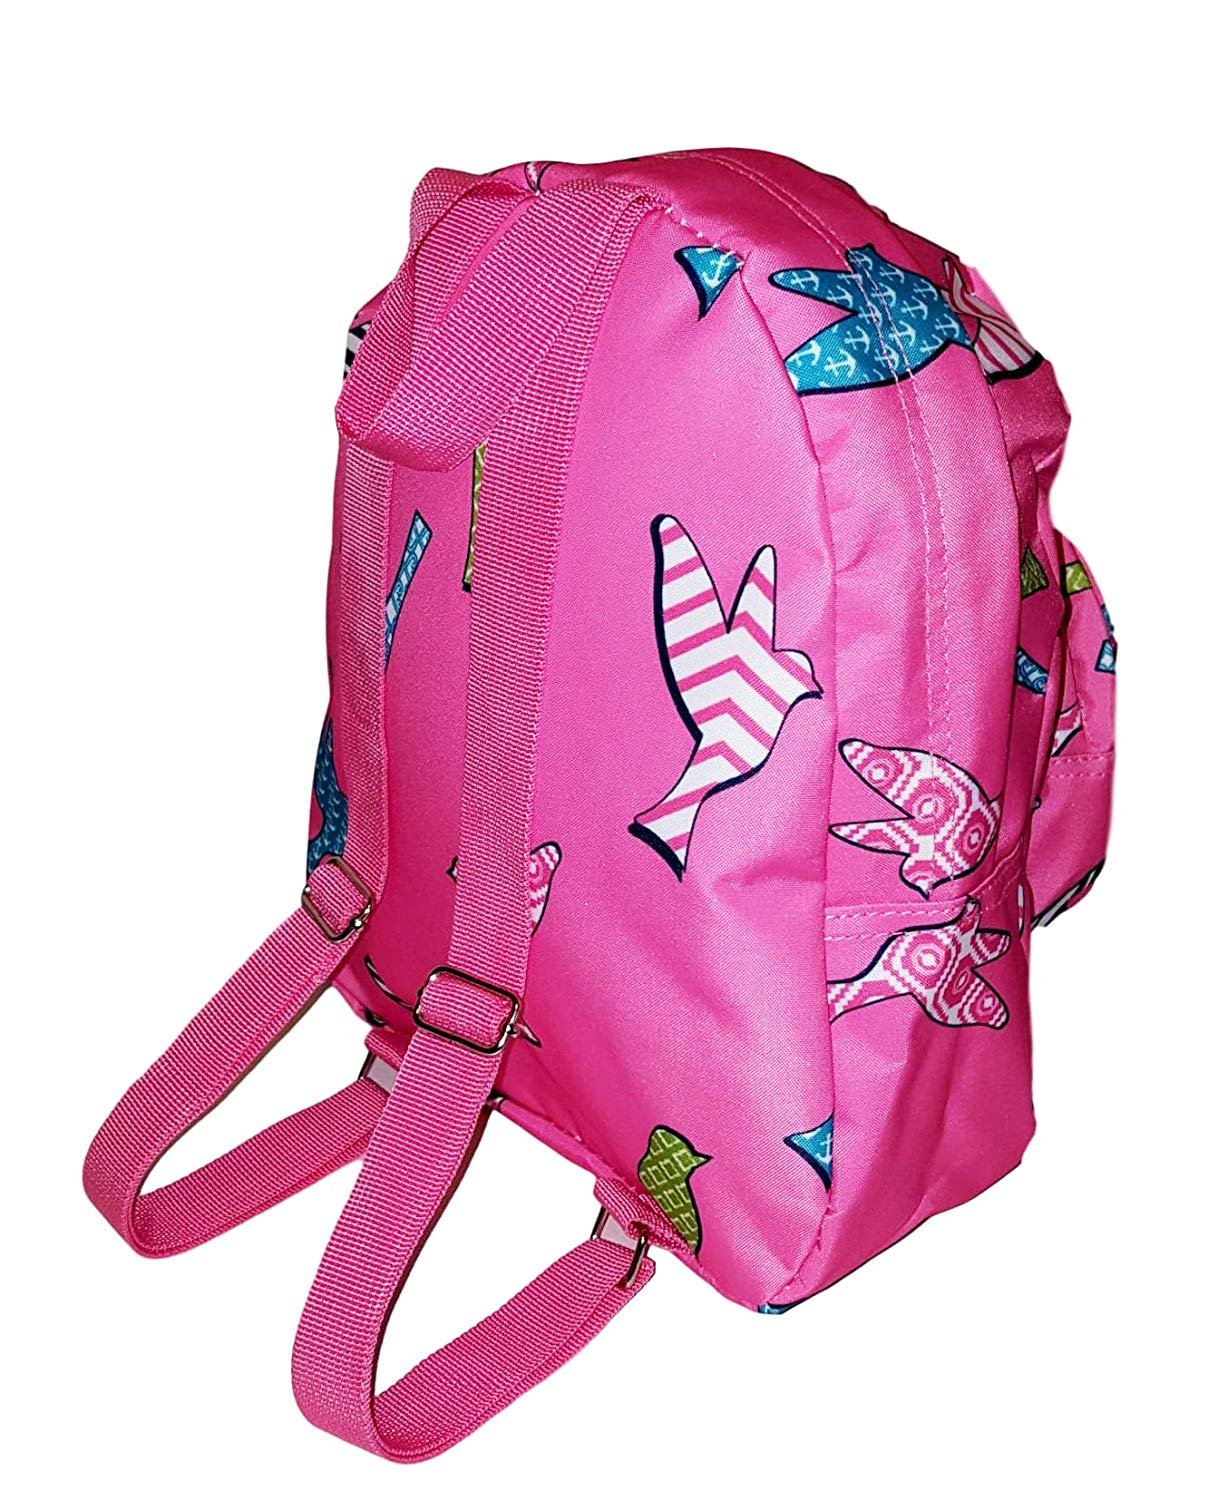 11-inch Mini Backpack Purse, Zipper Front Pockets Teen Child Pink Bird Print - image 3 of 3